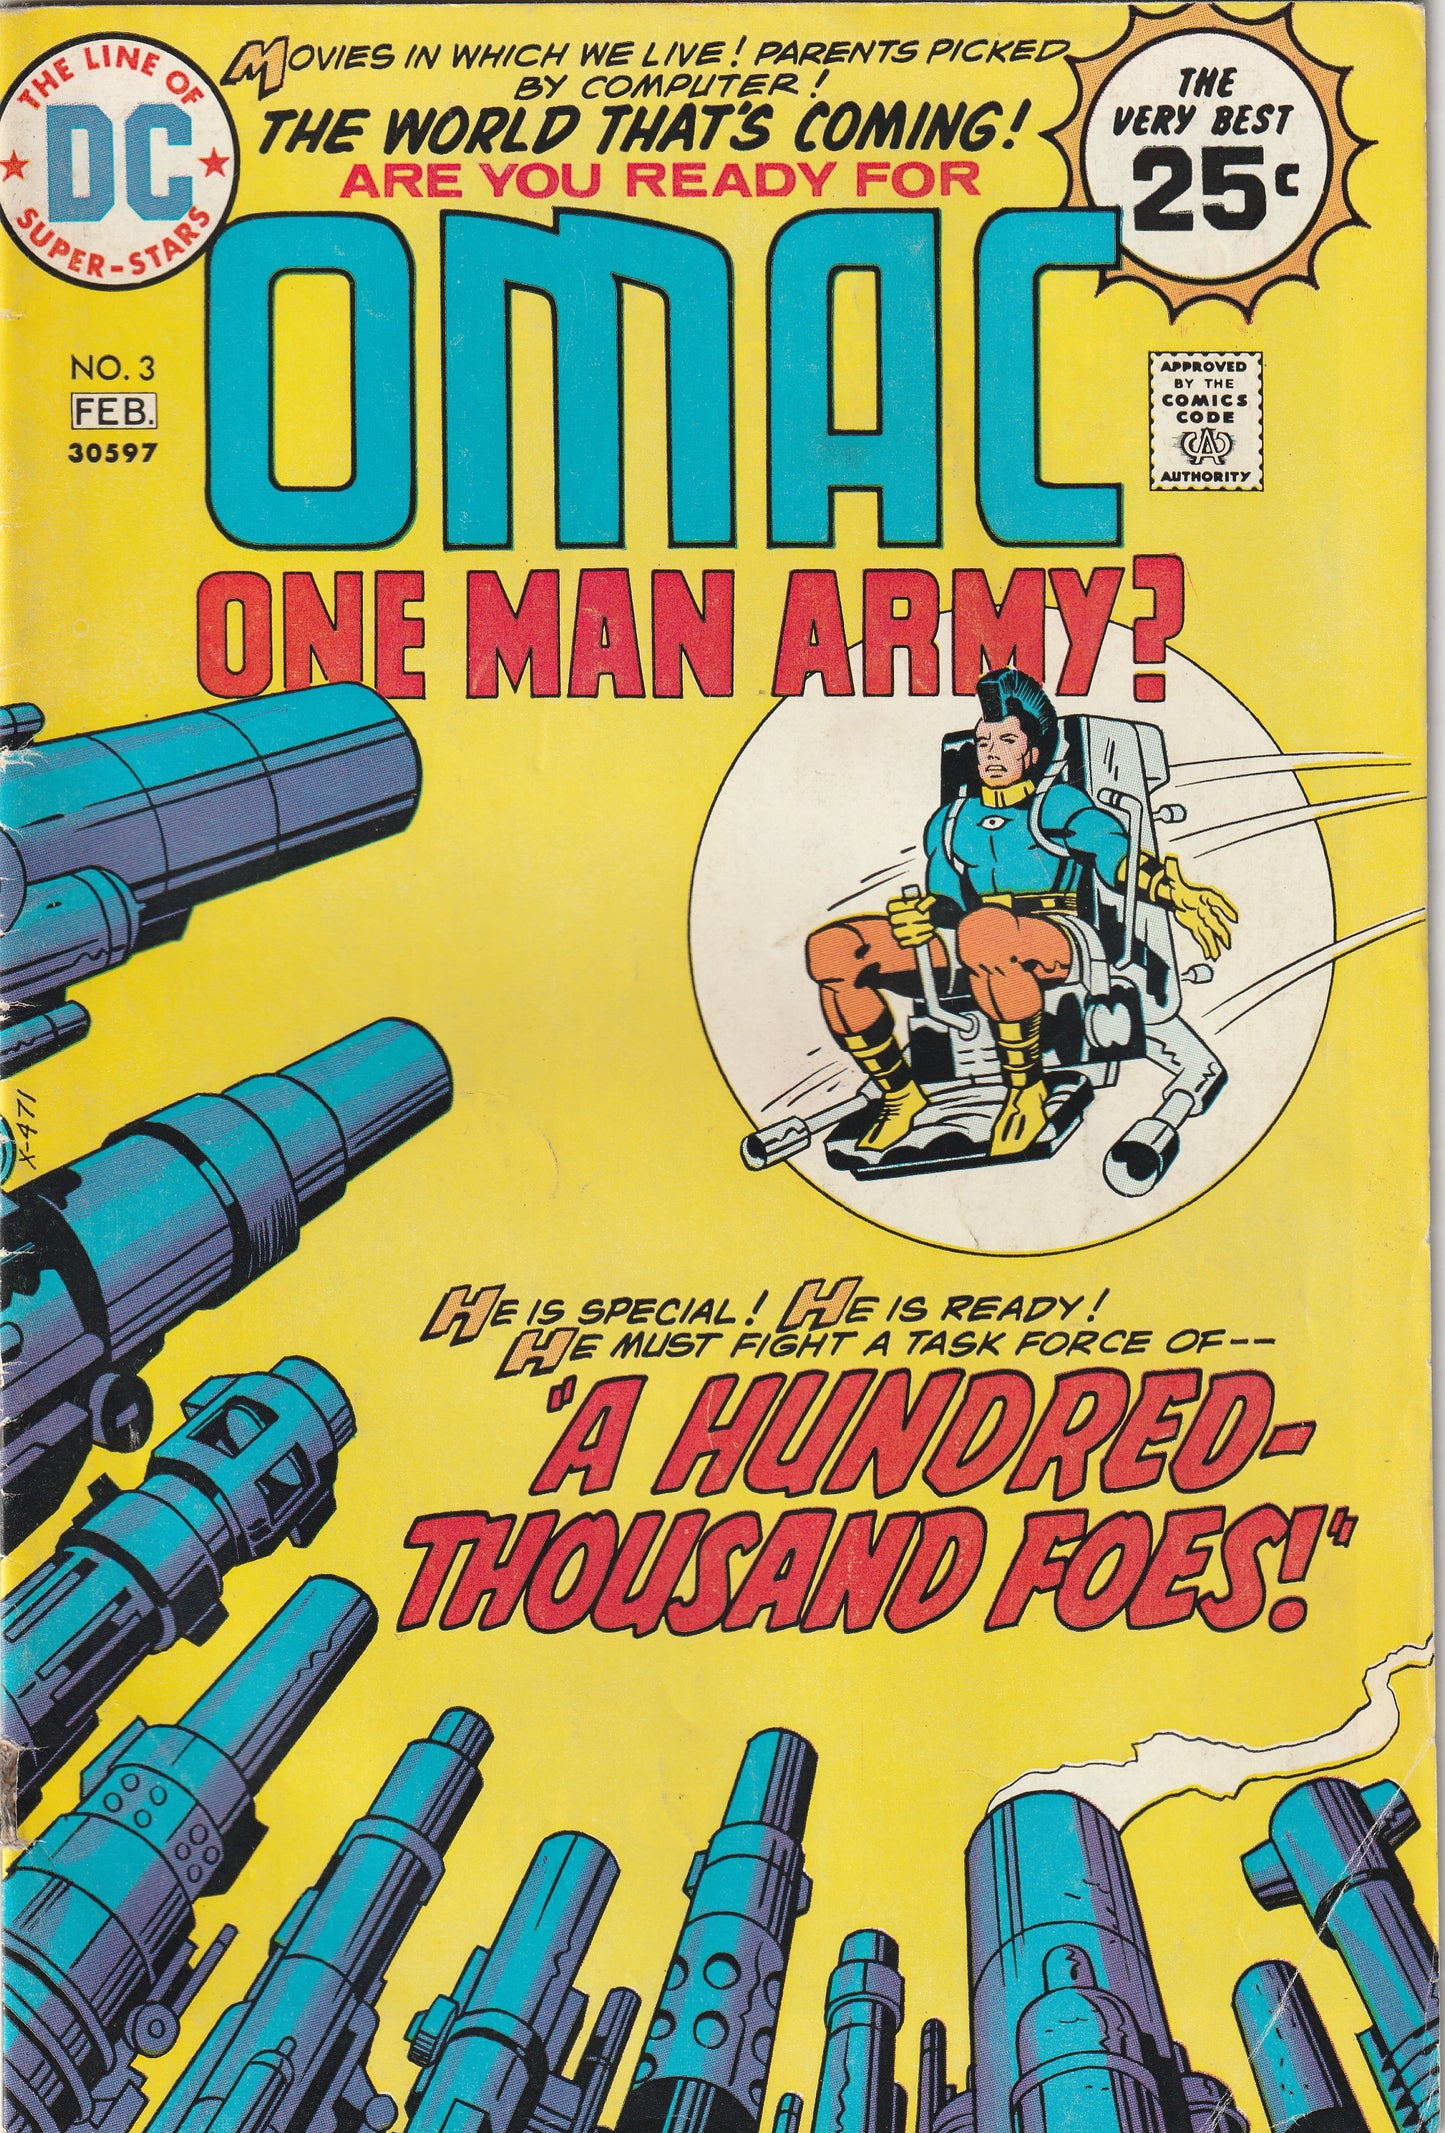 OMAC - One Man Army Corps (1974-1975) - Complete 8 issue series